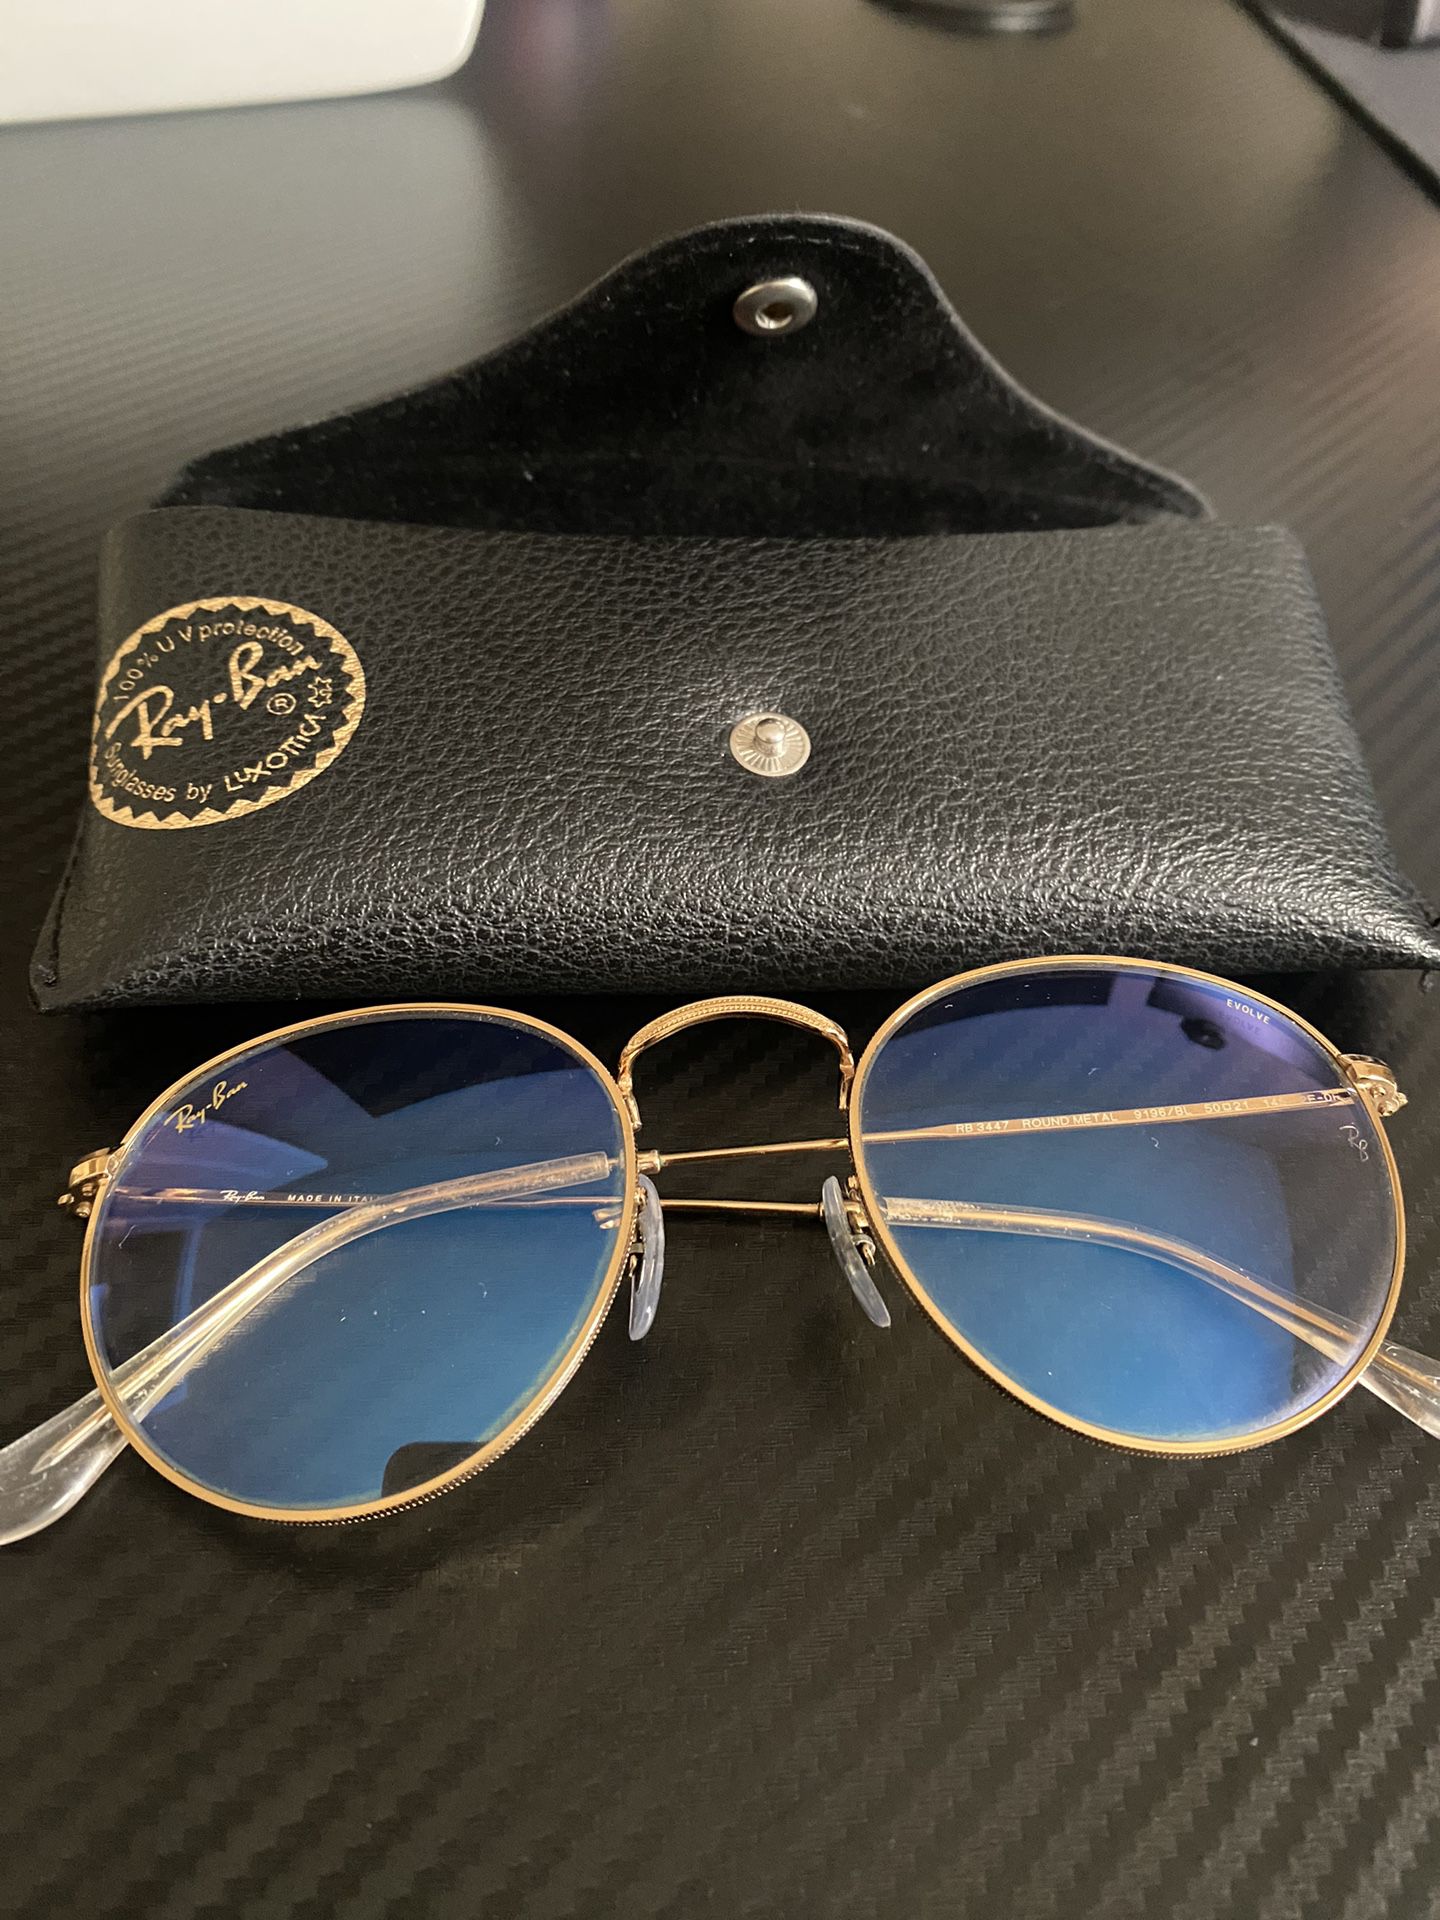 Ray-Ban Glasses Perfect Condition